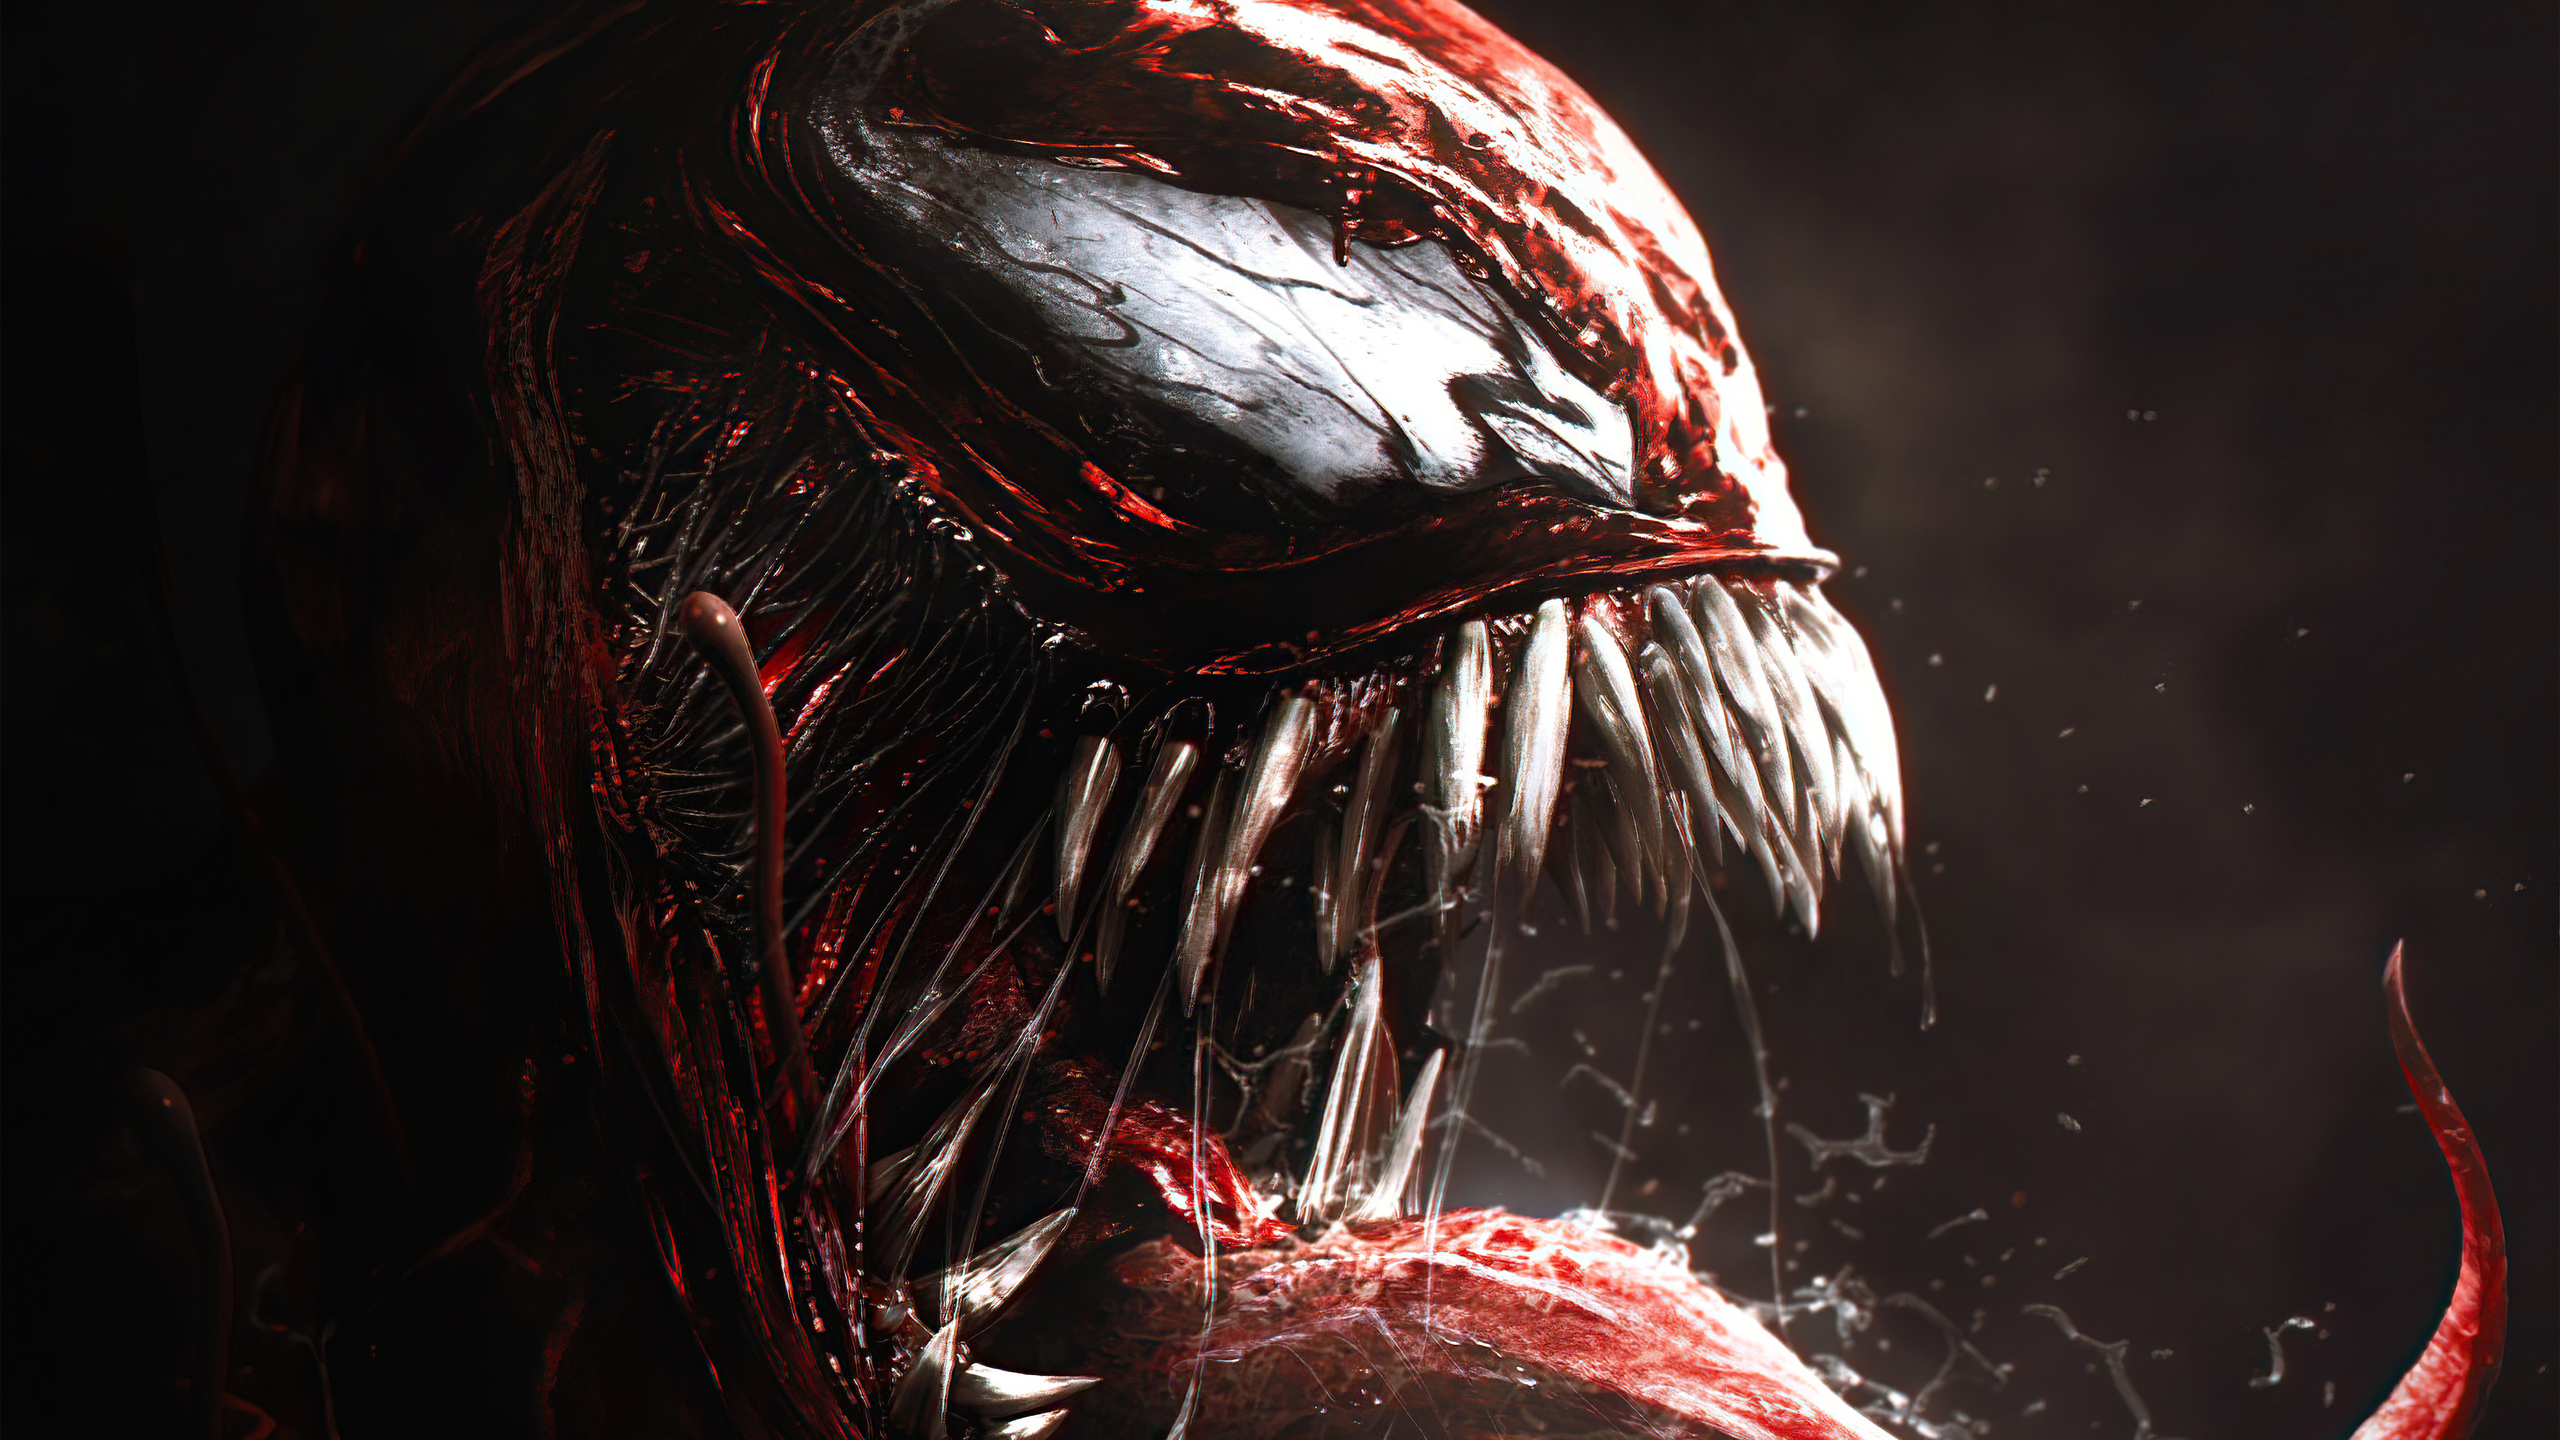 What Apps Is Venom Let There Be Carnage On 2560x1440 Venom Let There Be Carnage 5k 1440P Resolution HD 4k